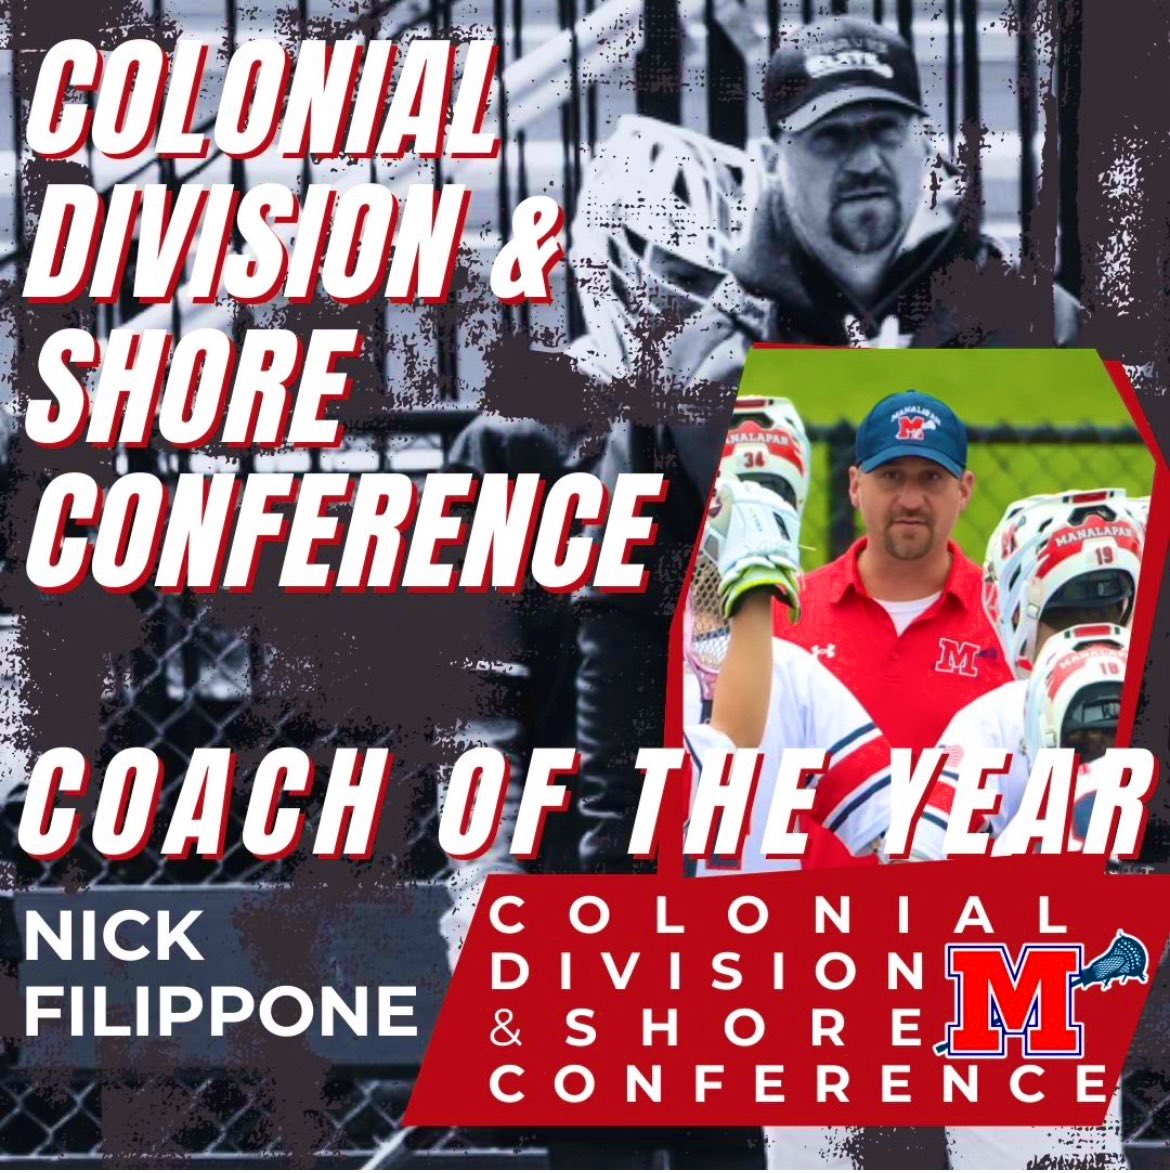 Congrats to @BravesHSLax on being named Coach of the Year for both the Shore Conference and the Colonial Division! You helped build the program, now keep it going! #tothenextstep #letsgobraves